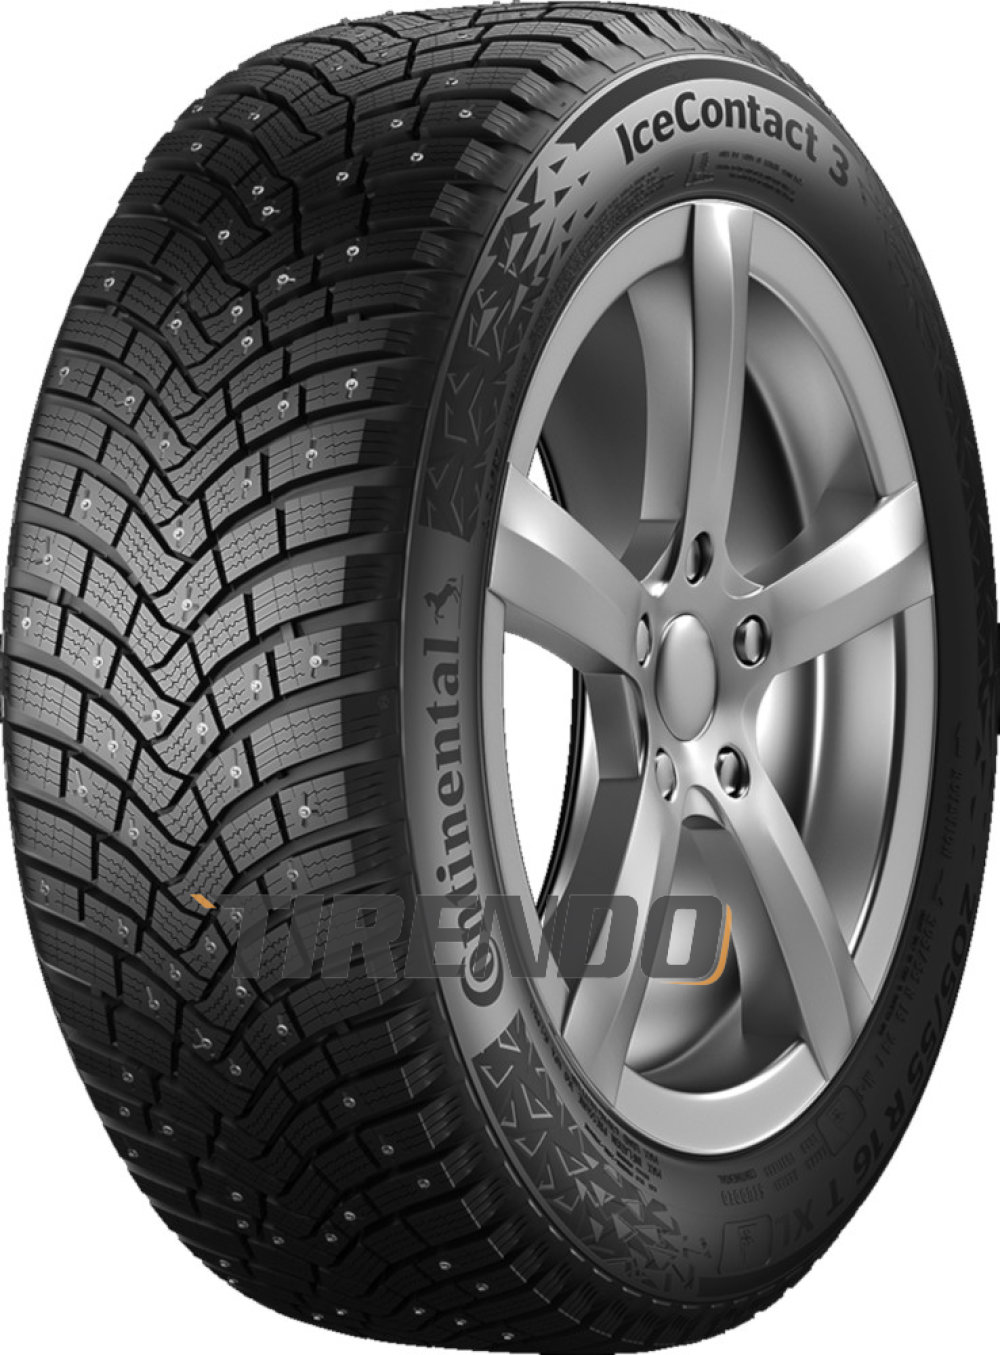 Continental IceContact 3 ( 175/65 R15 88T XL, bespiked ) von Continental